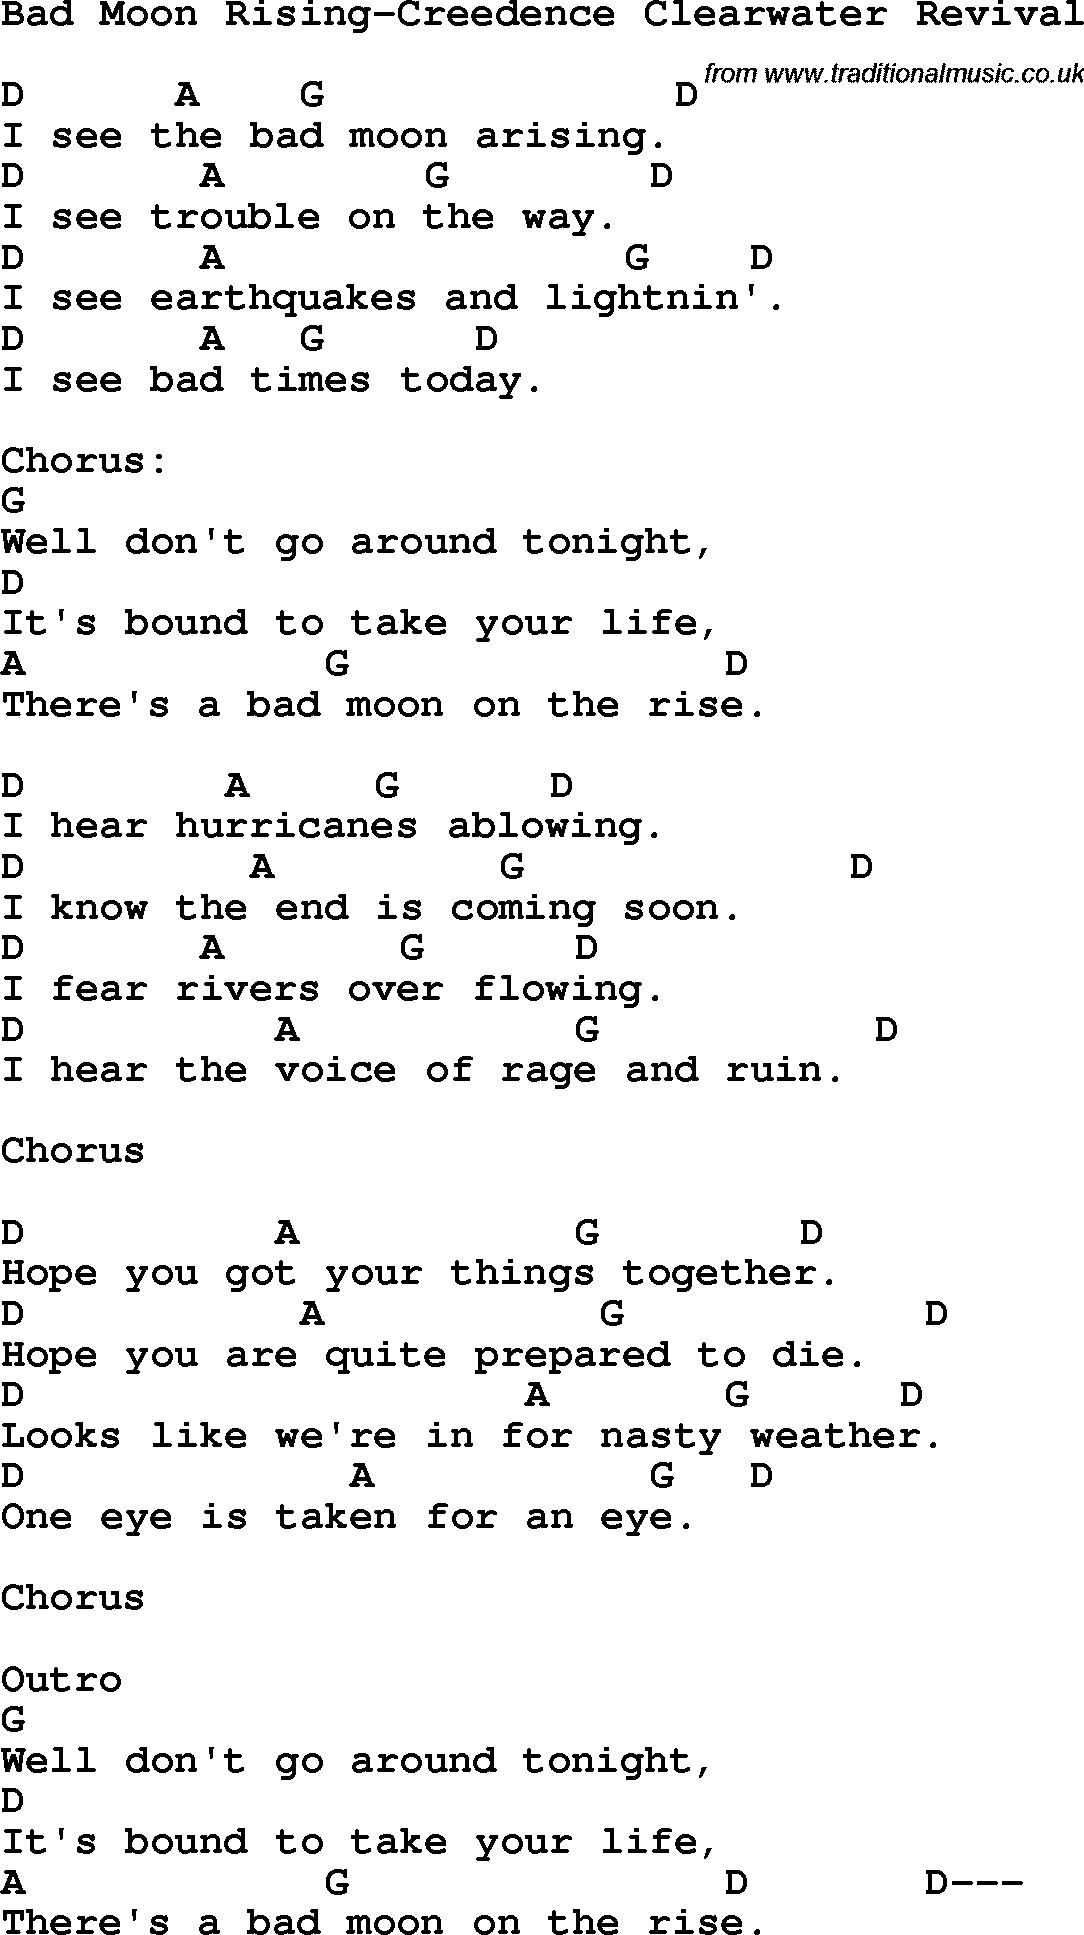 Protest Song Bad Moon Rising-Creedence Clearwater Revival lyrics and chords